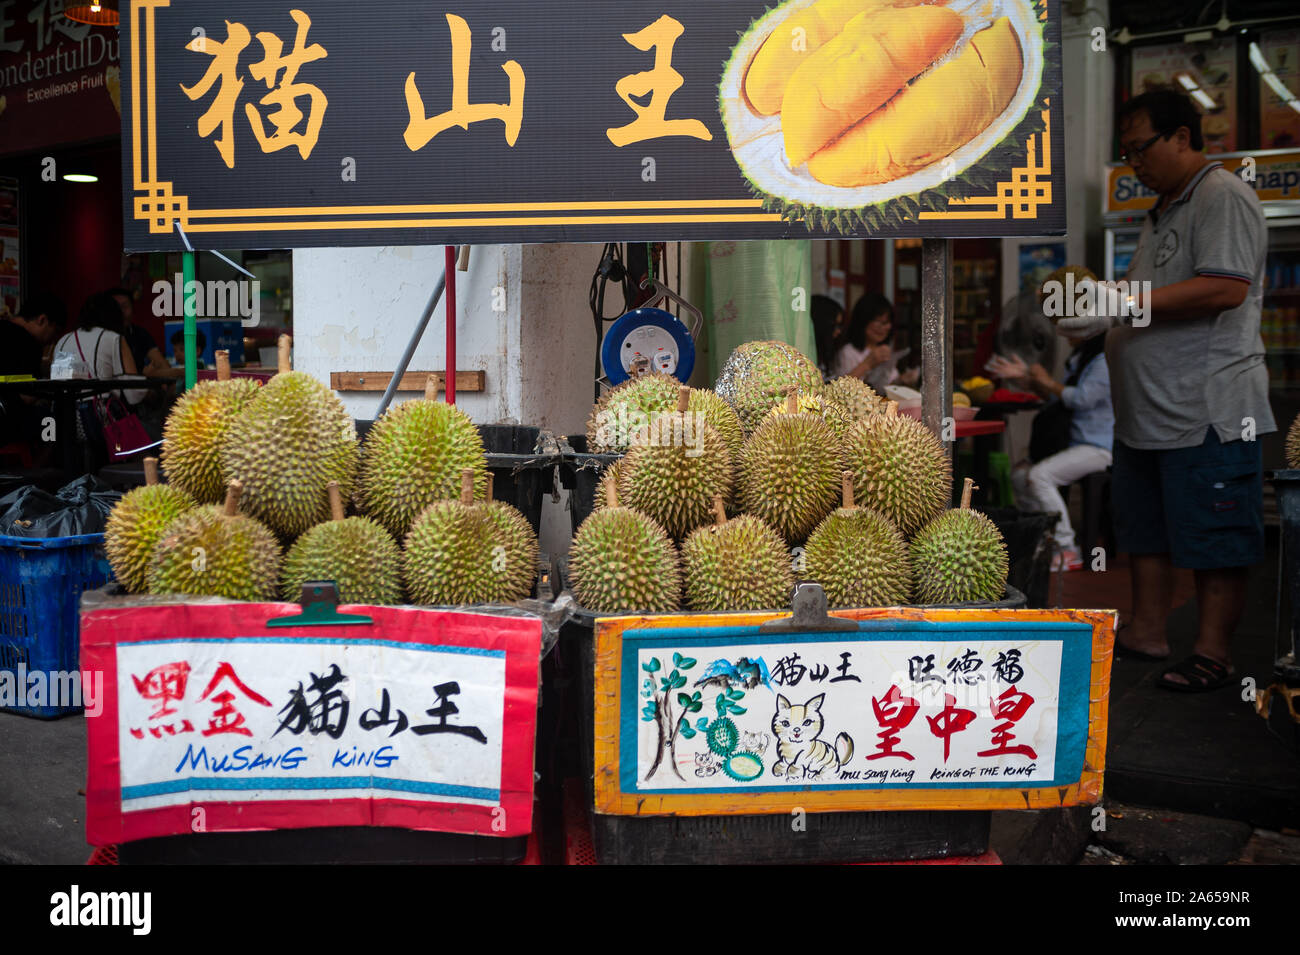 24.02.2019, Singapore, Republic of Singapore, Asia - Stall with fresh durians at a street market in Chinatown. Stock Photo